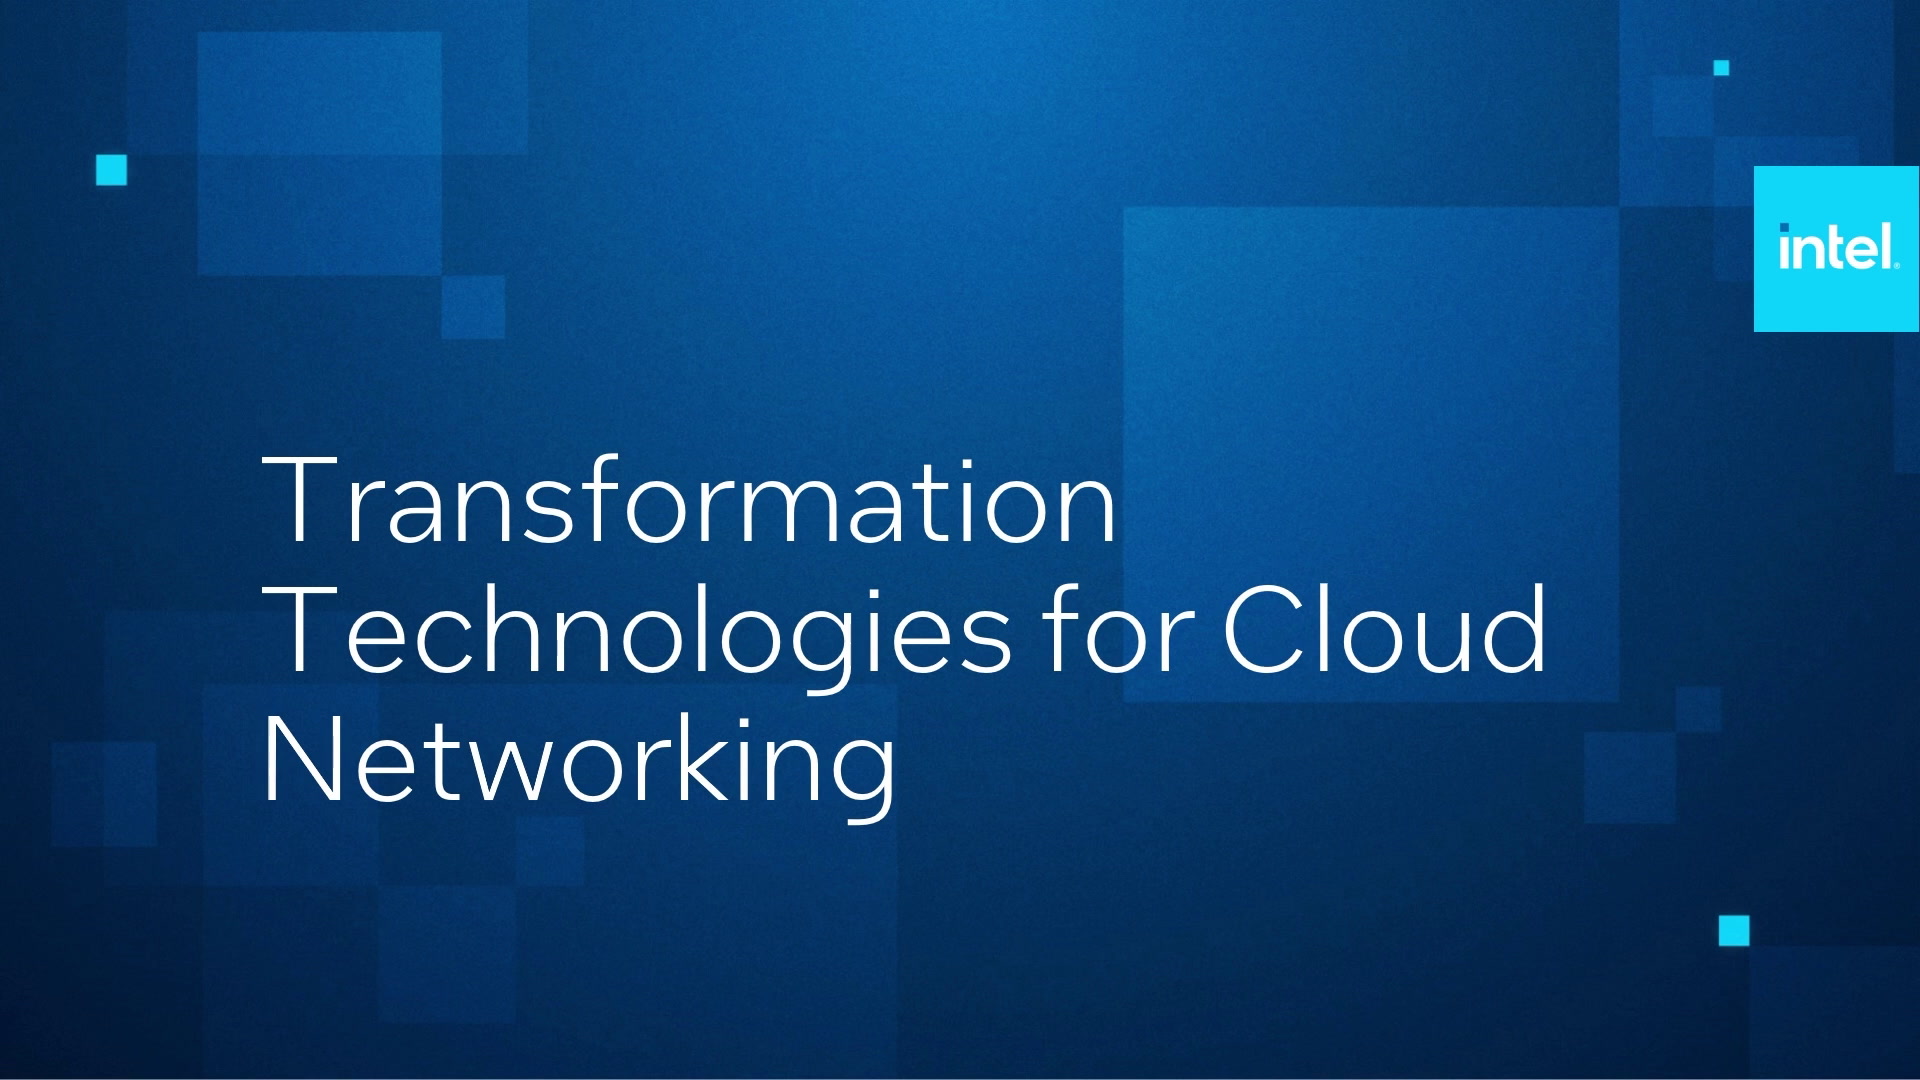 Chapter 1: Transformation Technologies for Cloud Networking